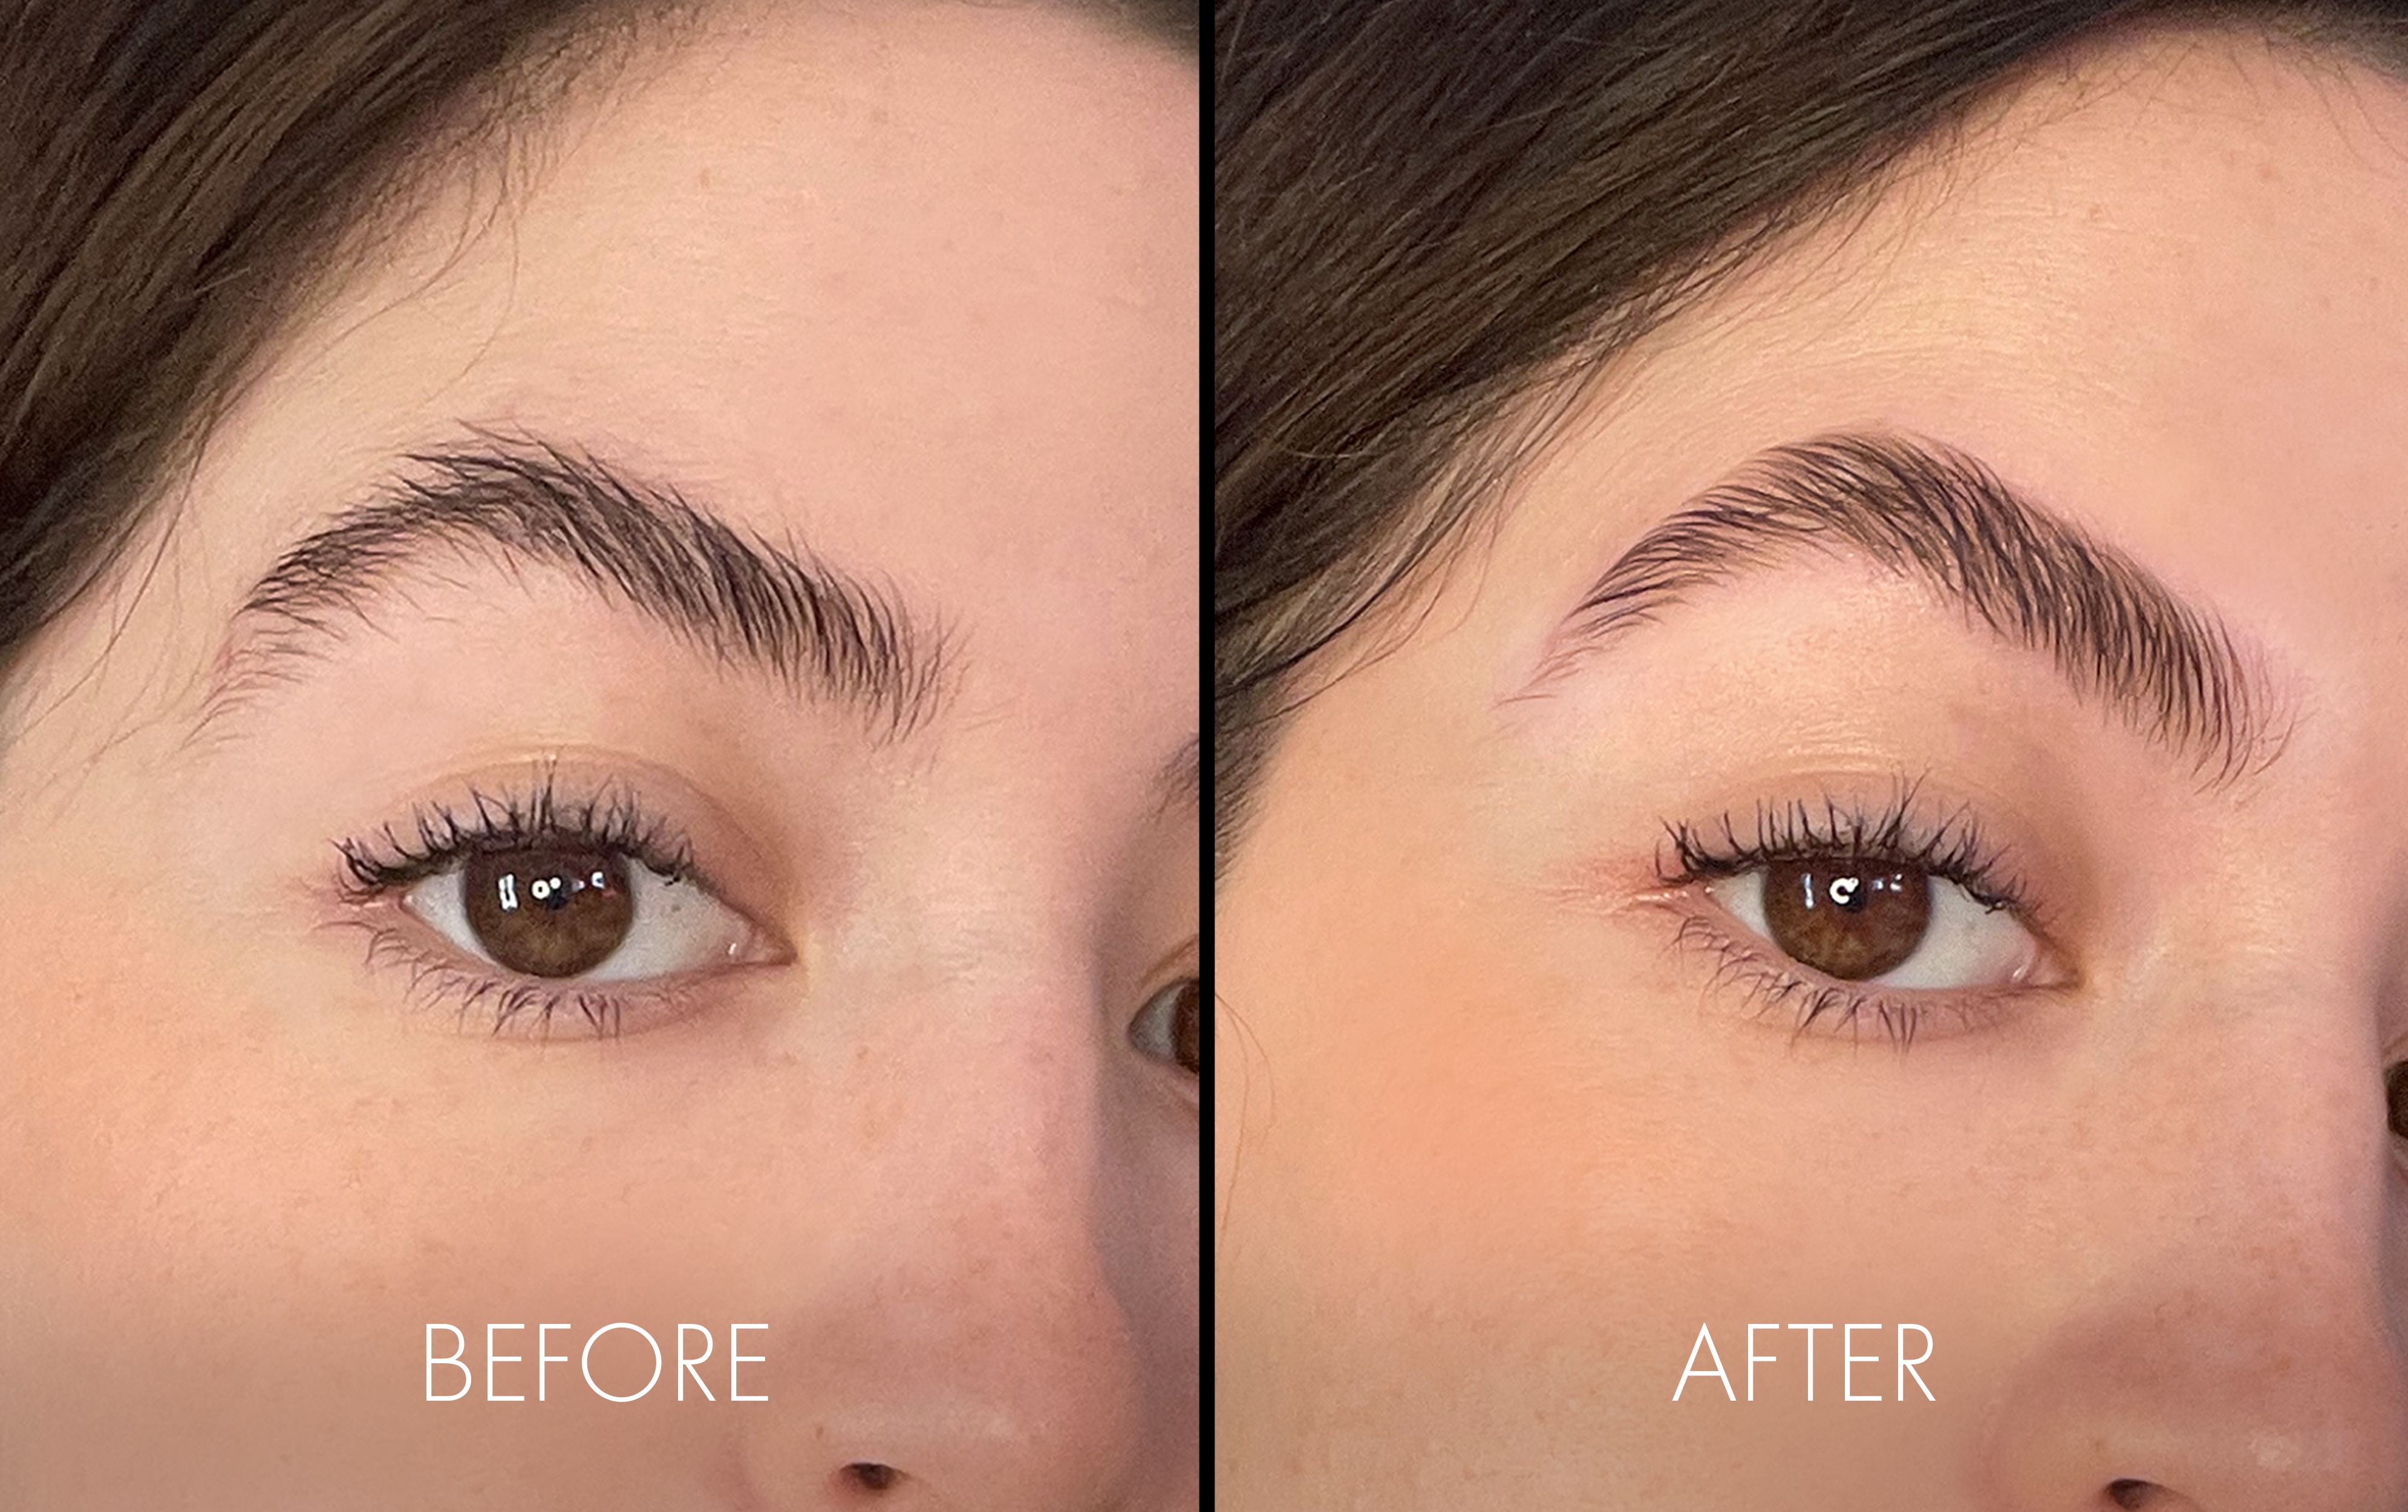 Before And After Tat Eyebrows Closeup 1661796319 